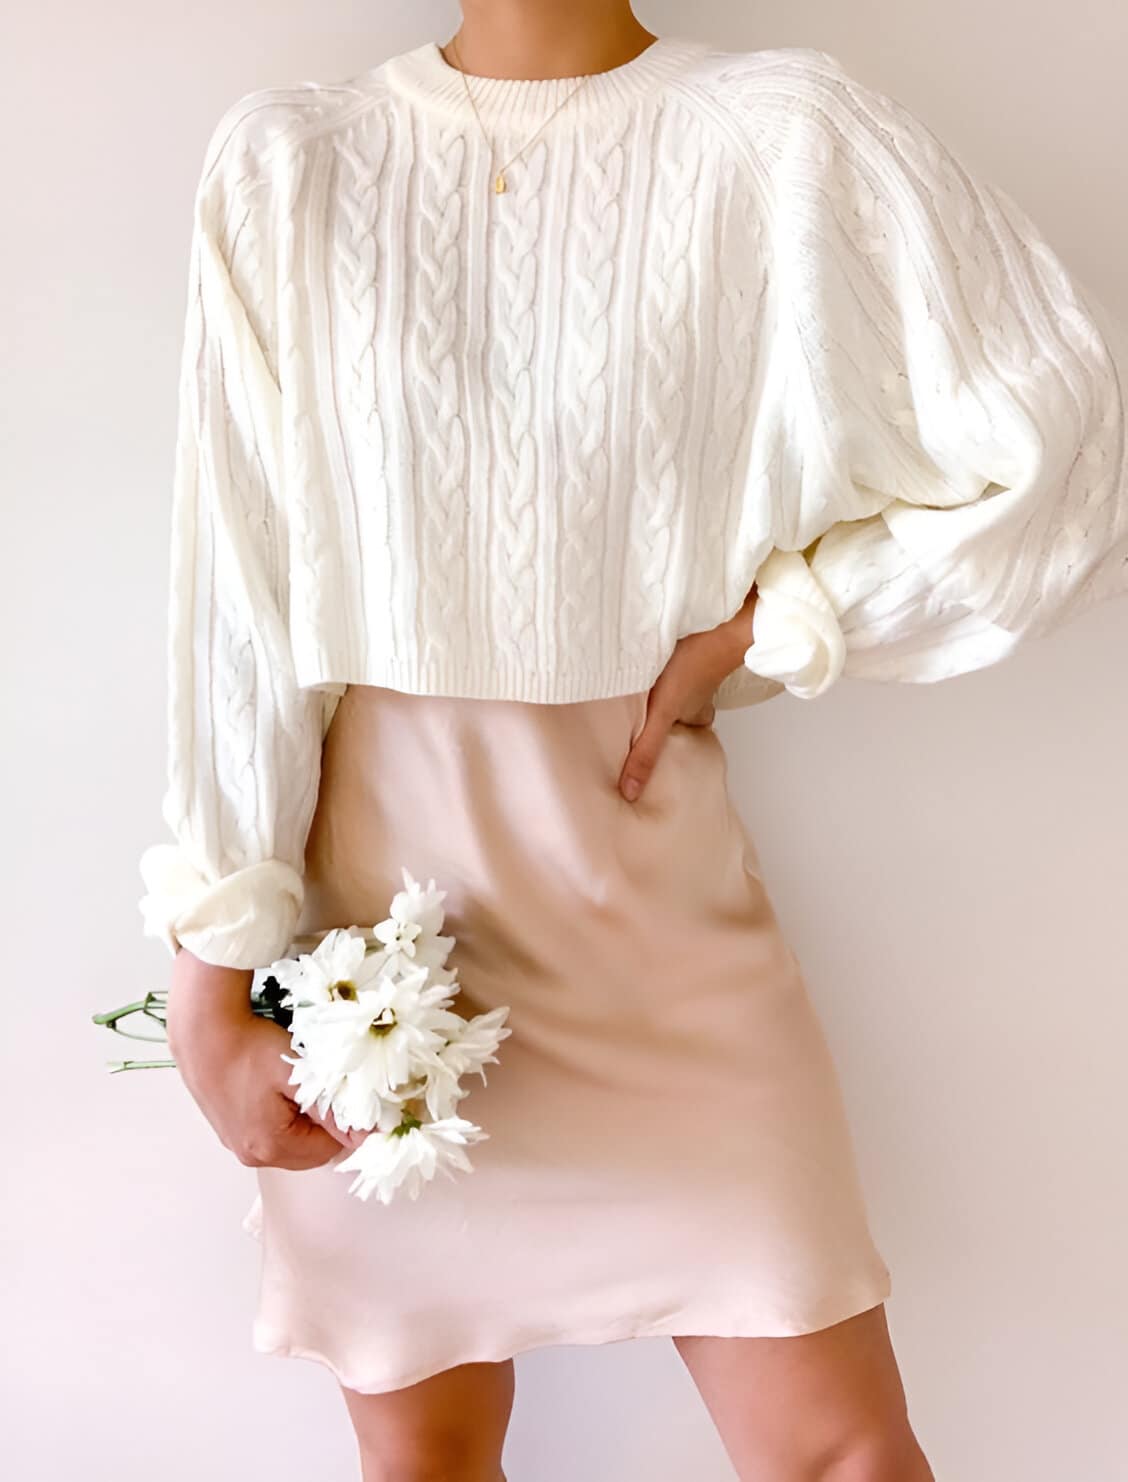 30 Classy Romantic Outfit Ideas Perfect For A Romantic Night Out 24